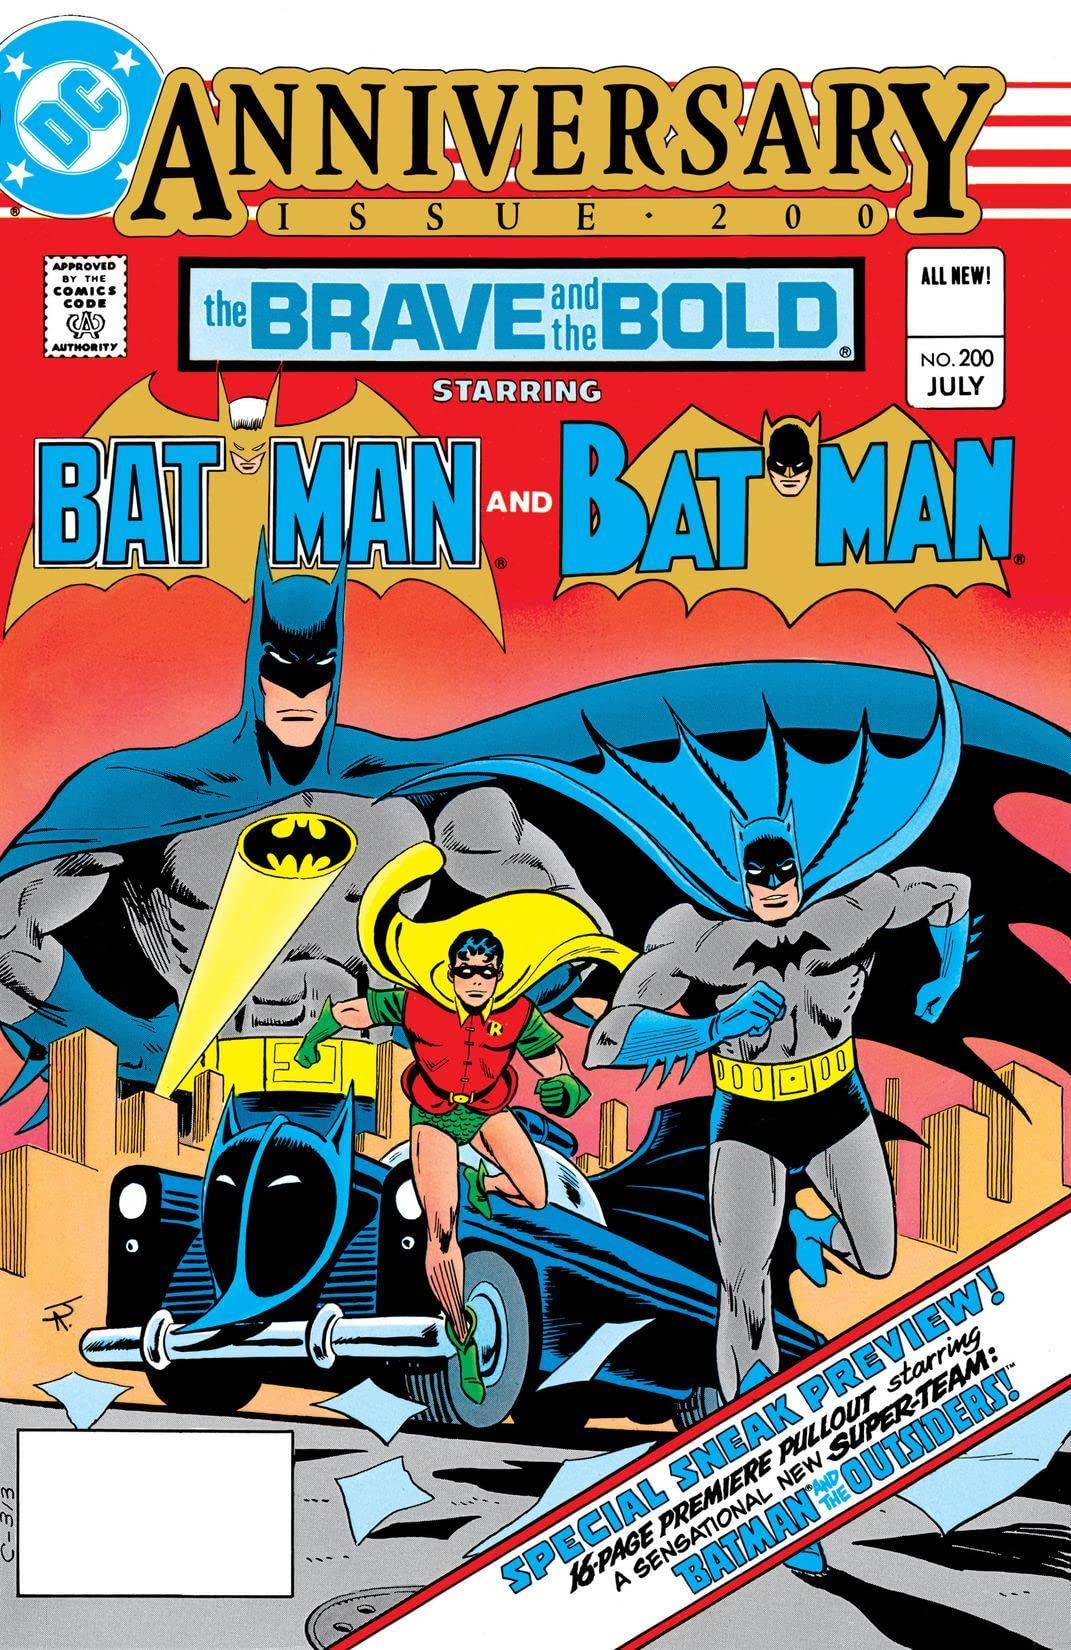 Brave and the Bold #200 cover by Jim Aparo